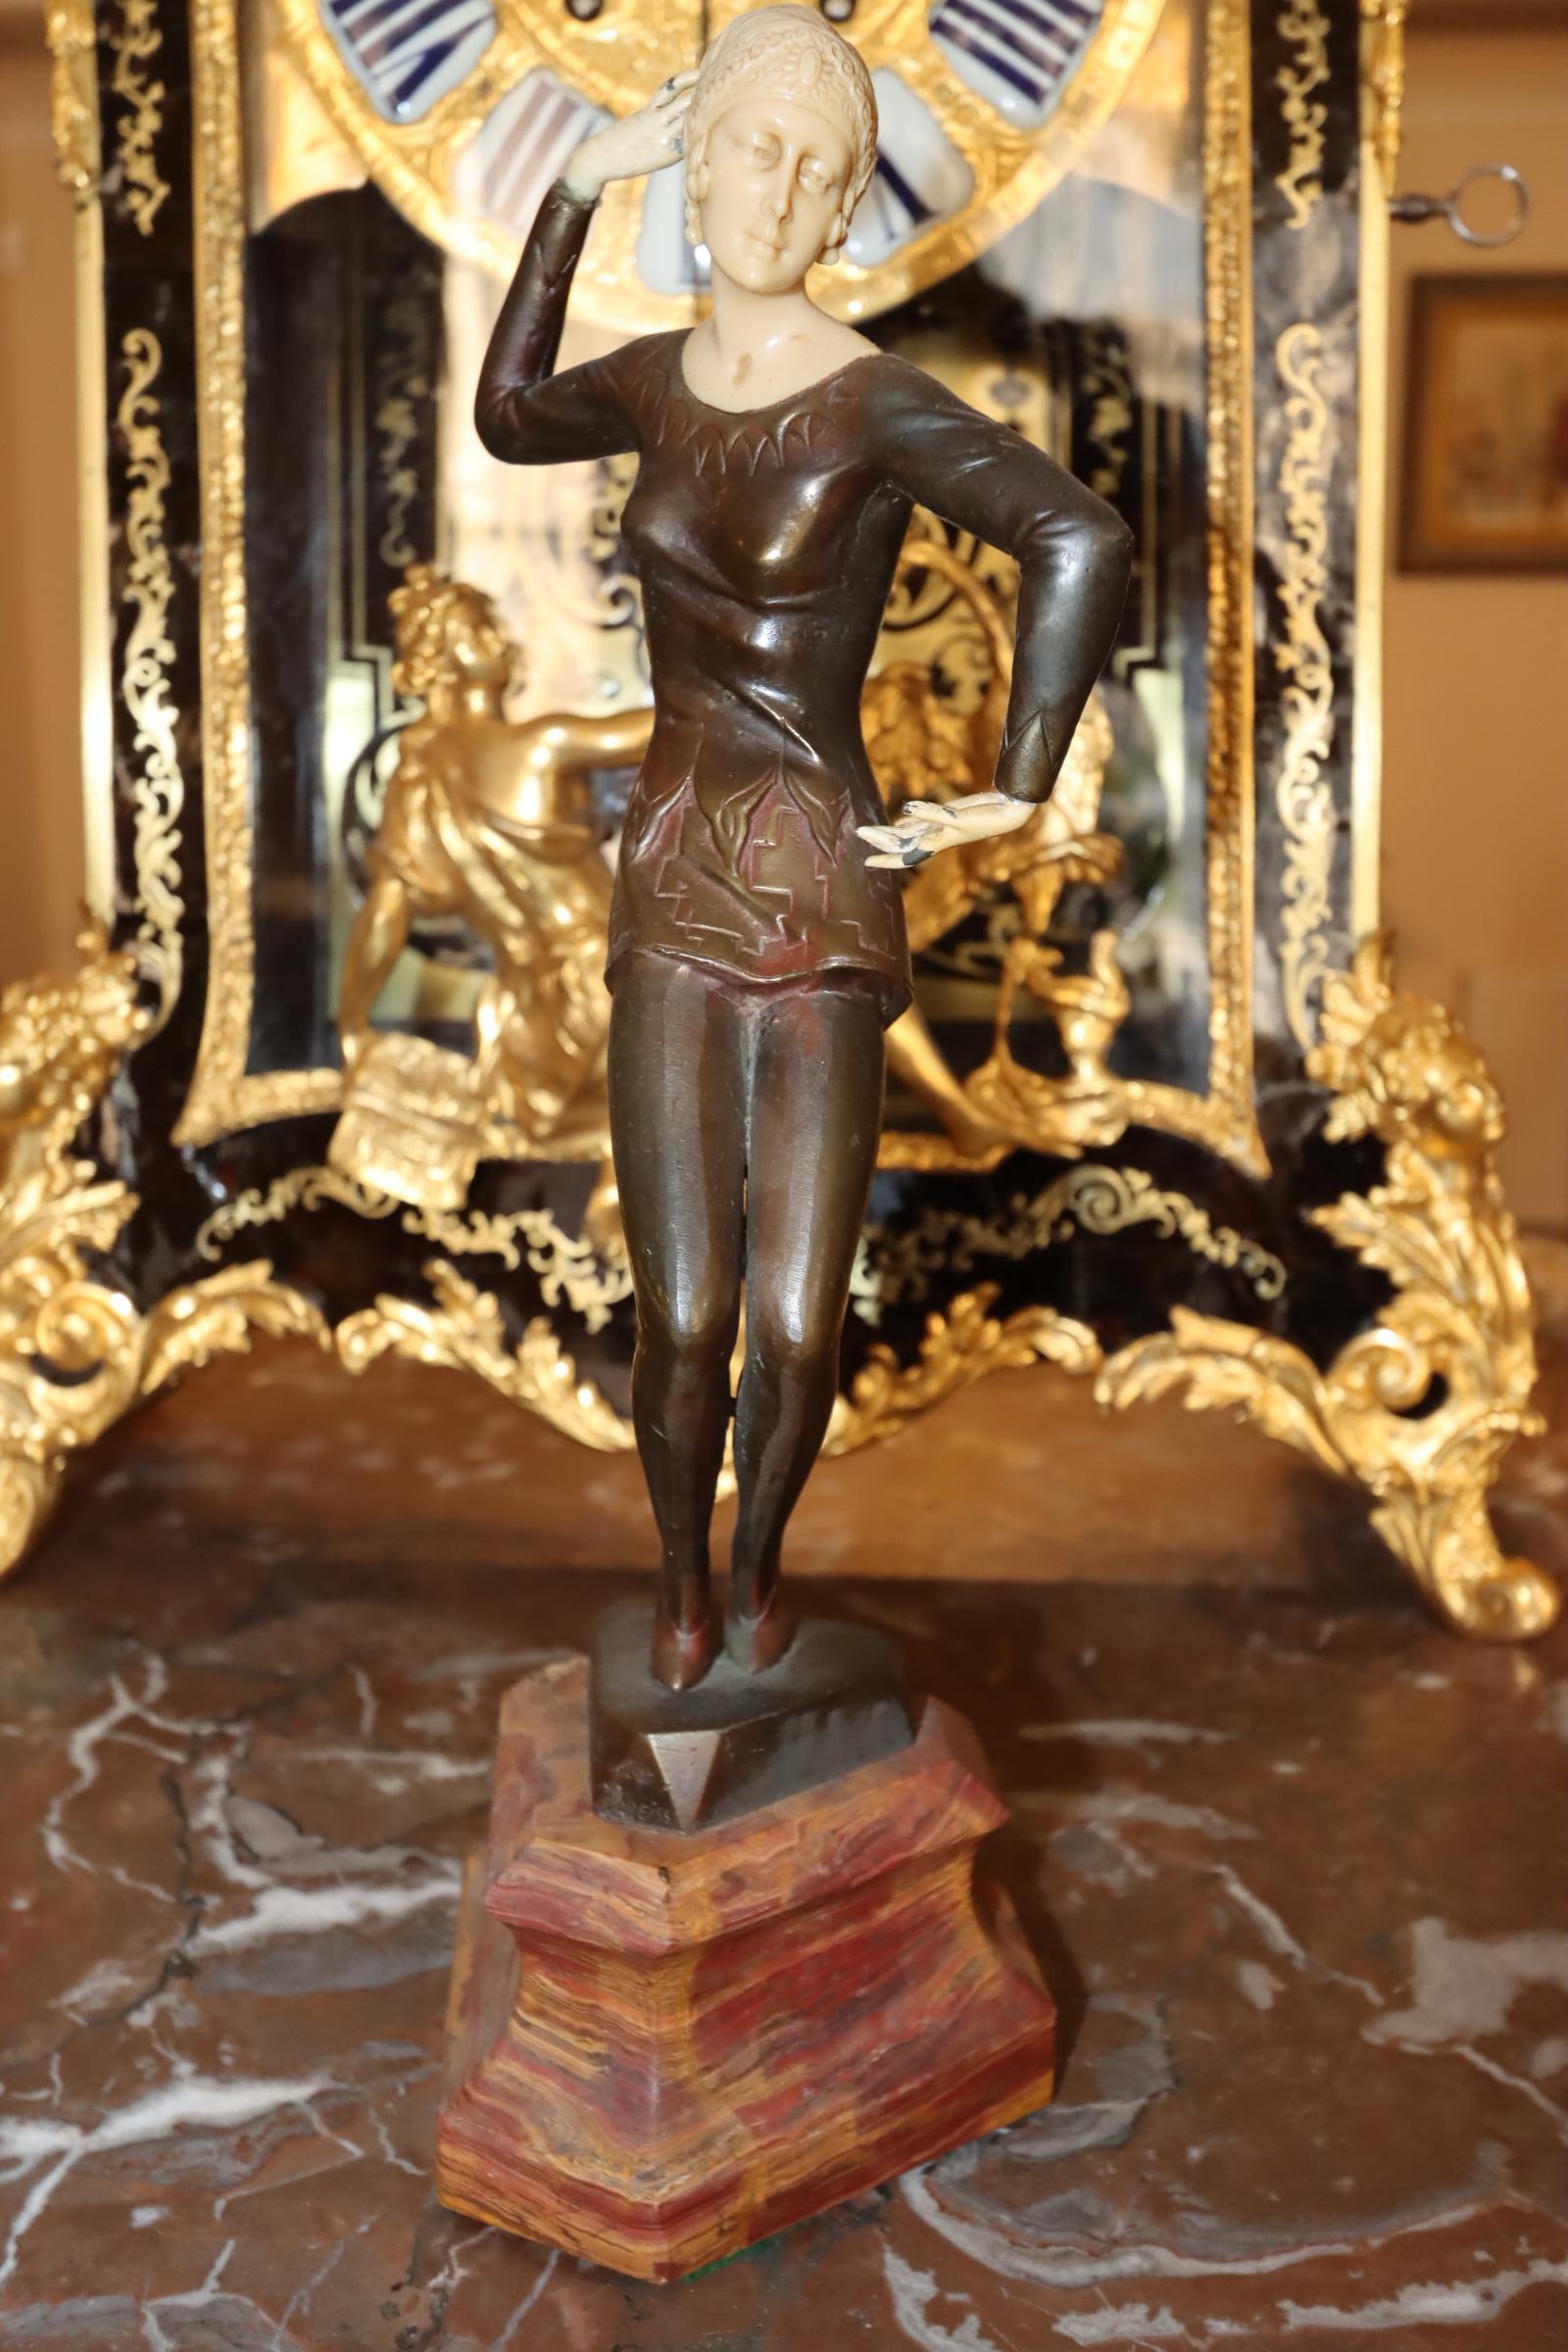 Capturing the spirit of the Roaring Twenties, this exquisite Art Deco figurine titled 'Ballerina' is a mesmerizing blend of bronze and bone. Gracefully poised in a dynamic dance pose, the sleek lines and geometric elegance of the Art Deco era are